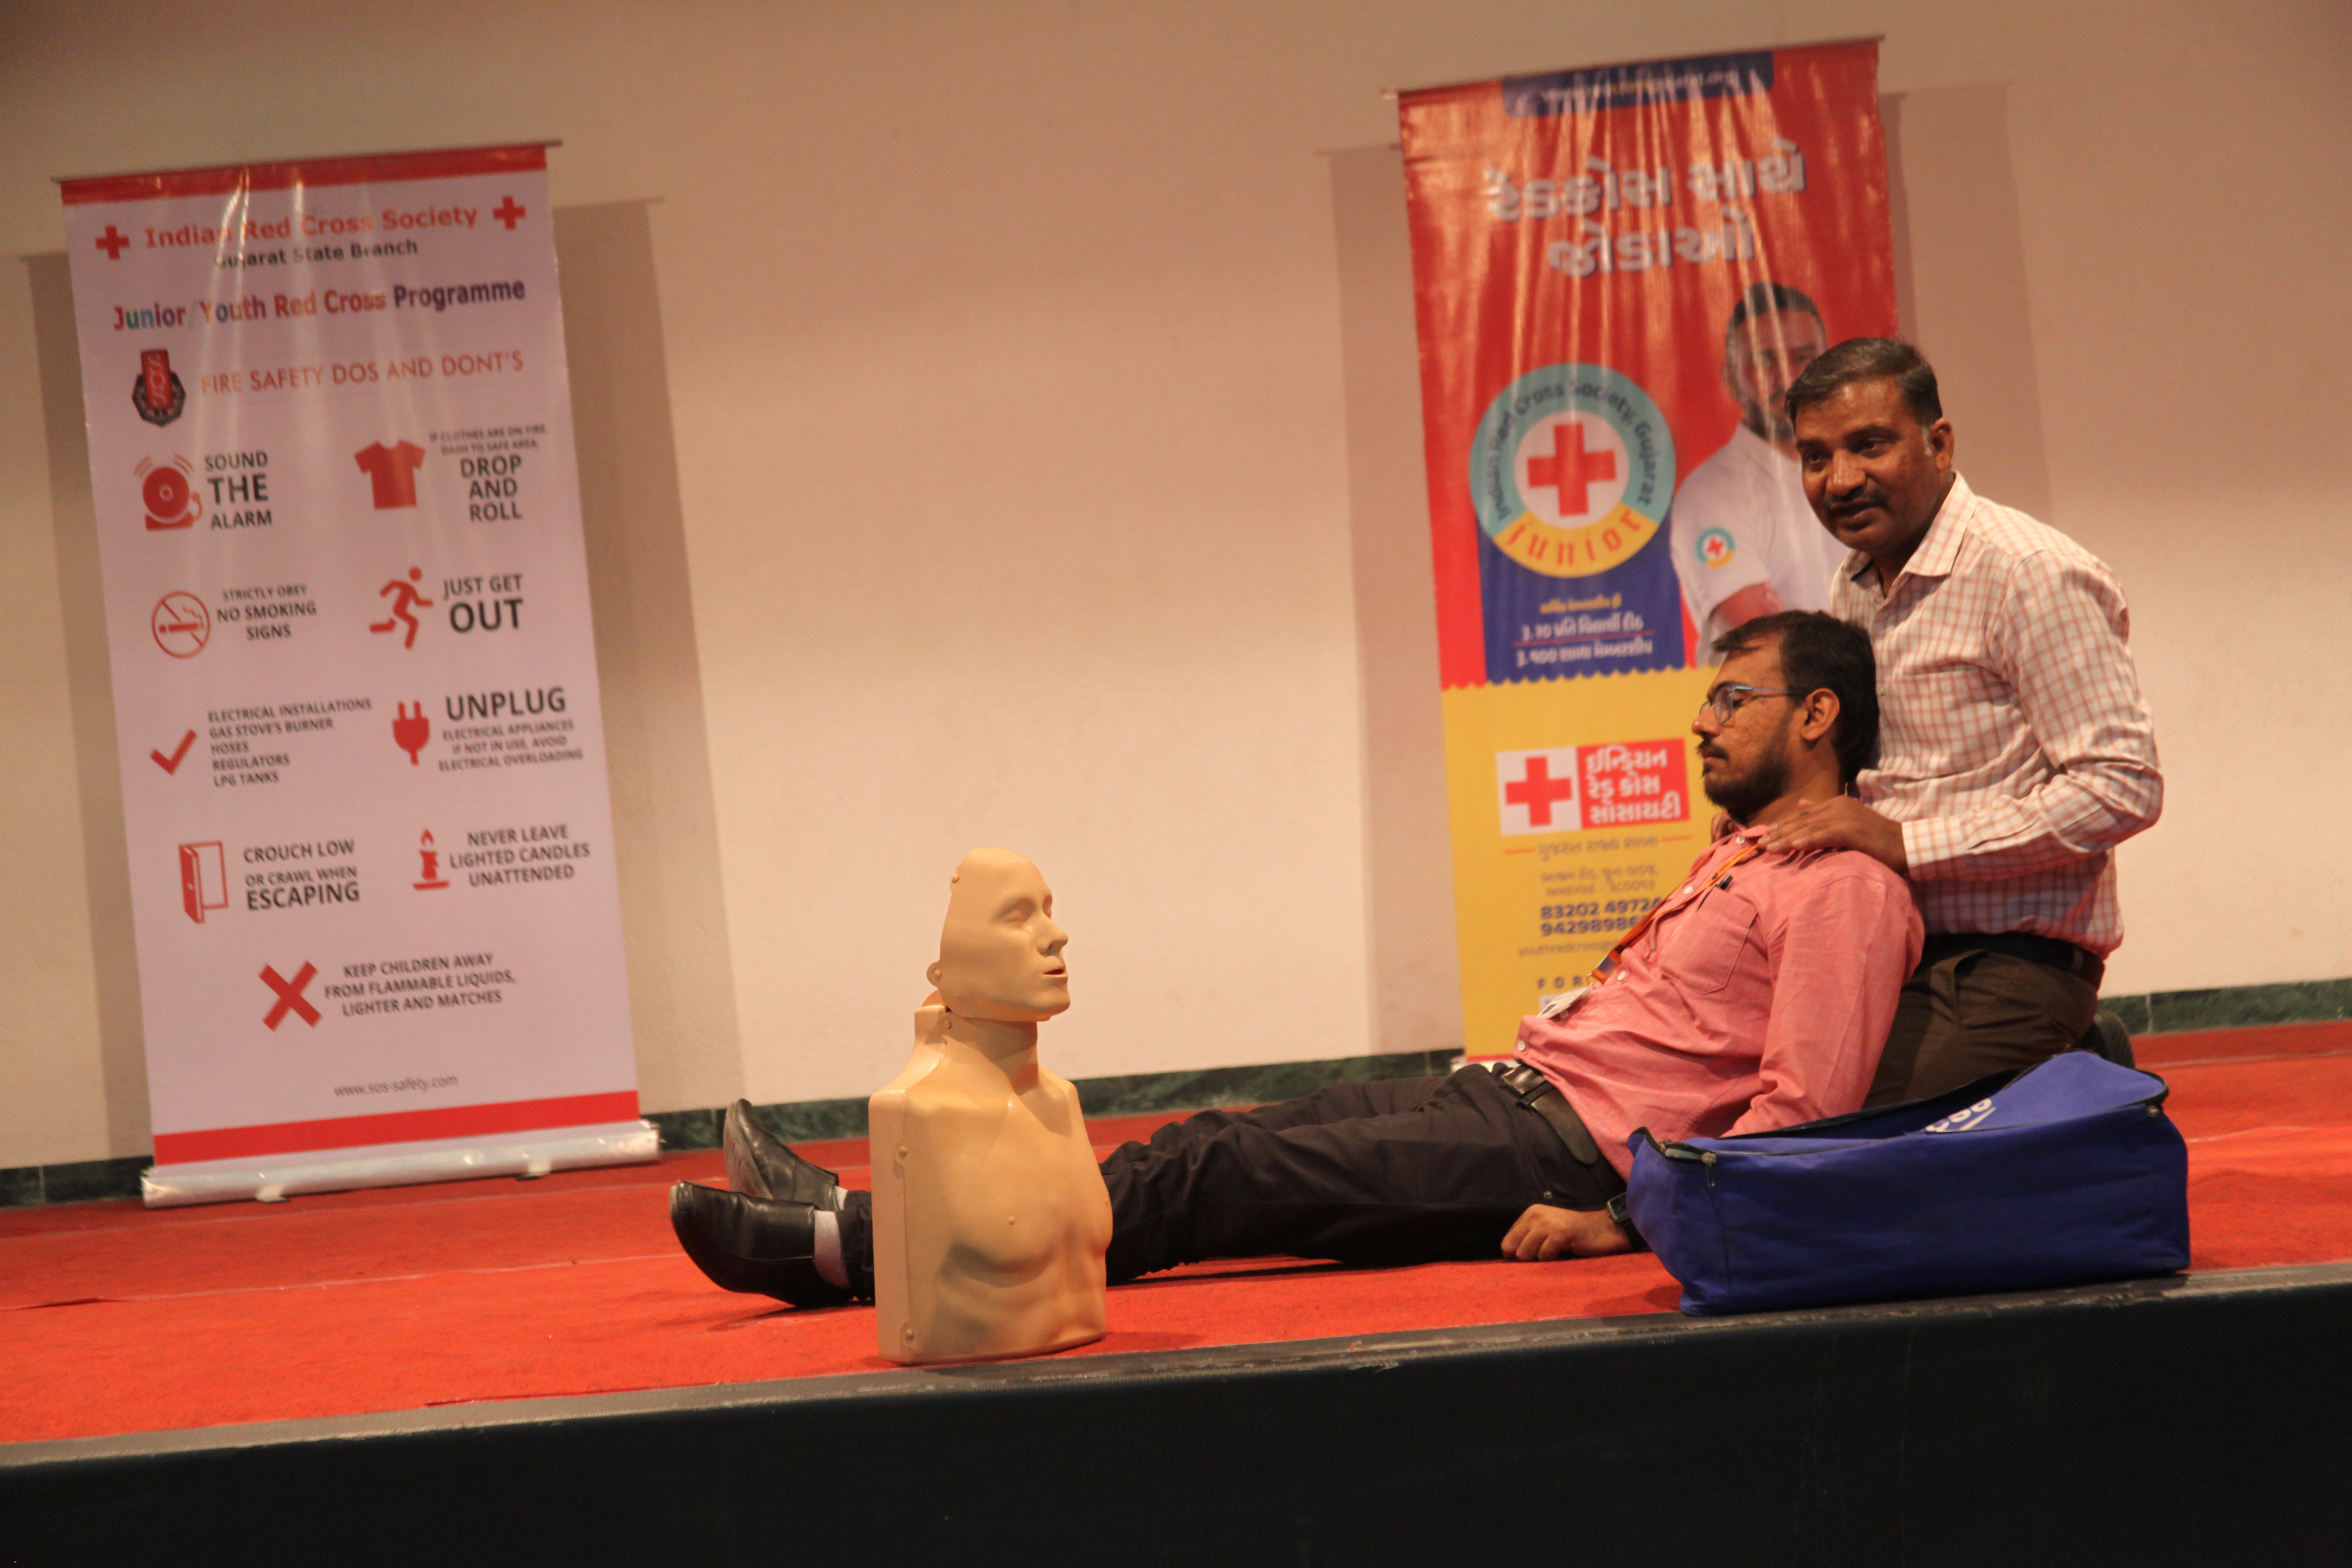 Training & Awareness Program on First Aid & Basic Life Support